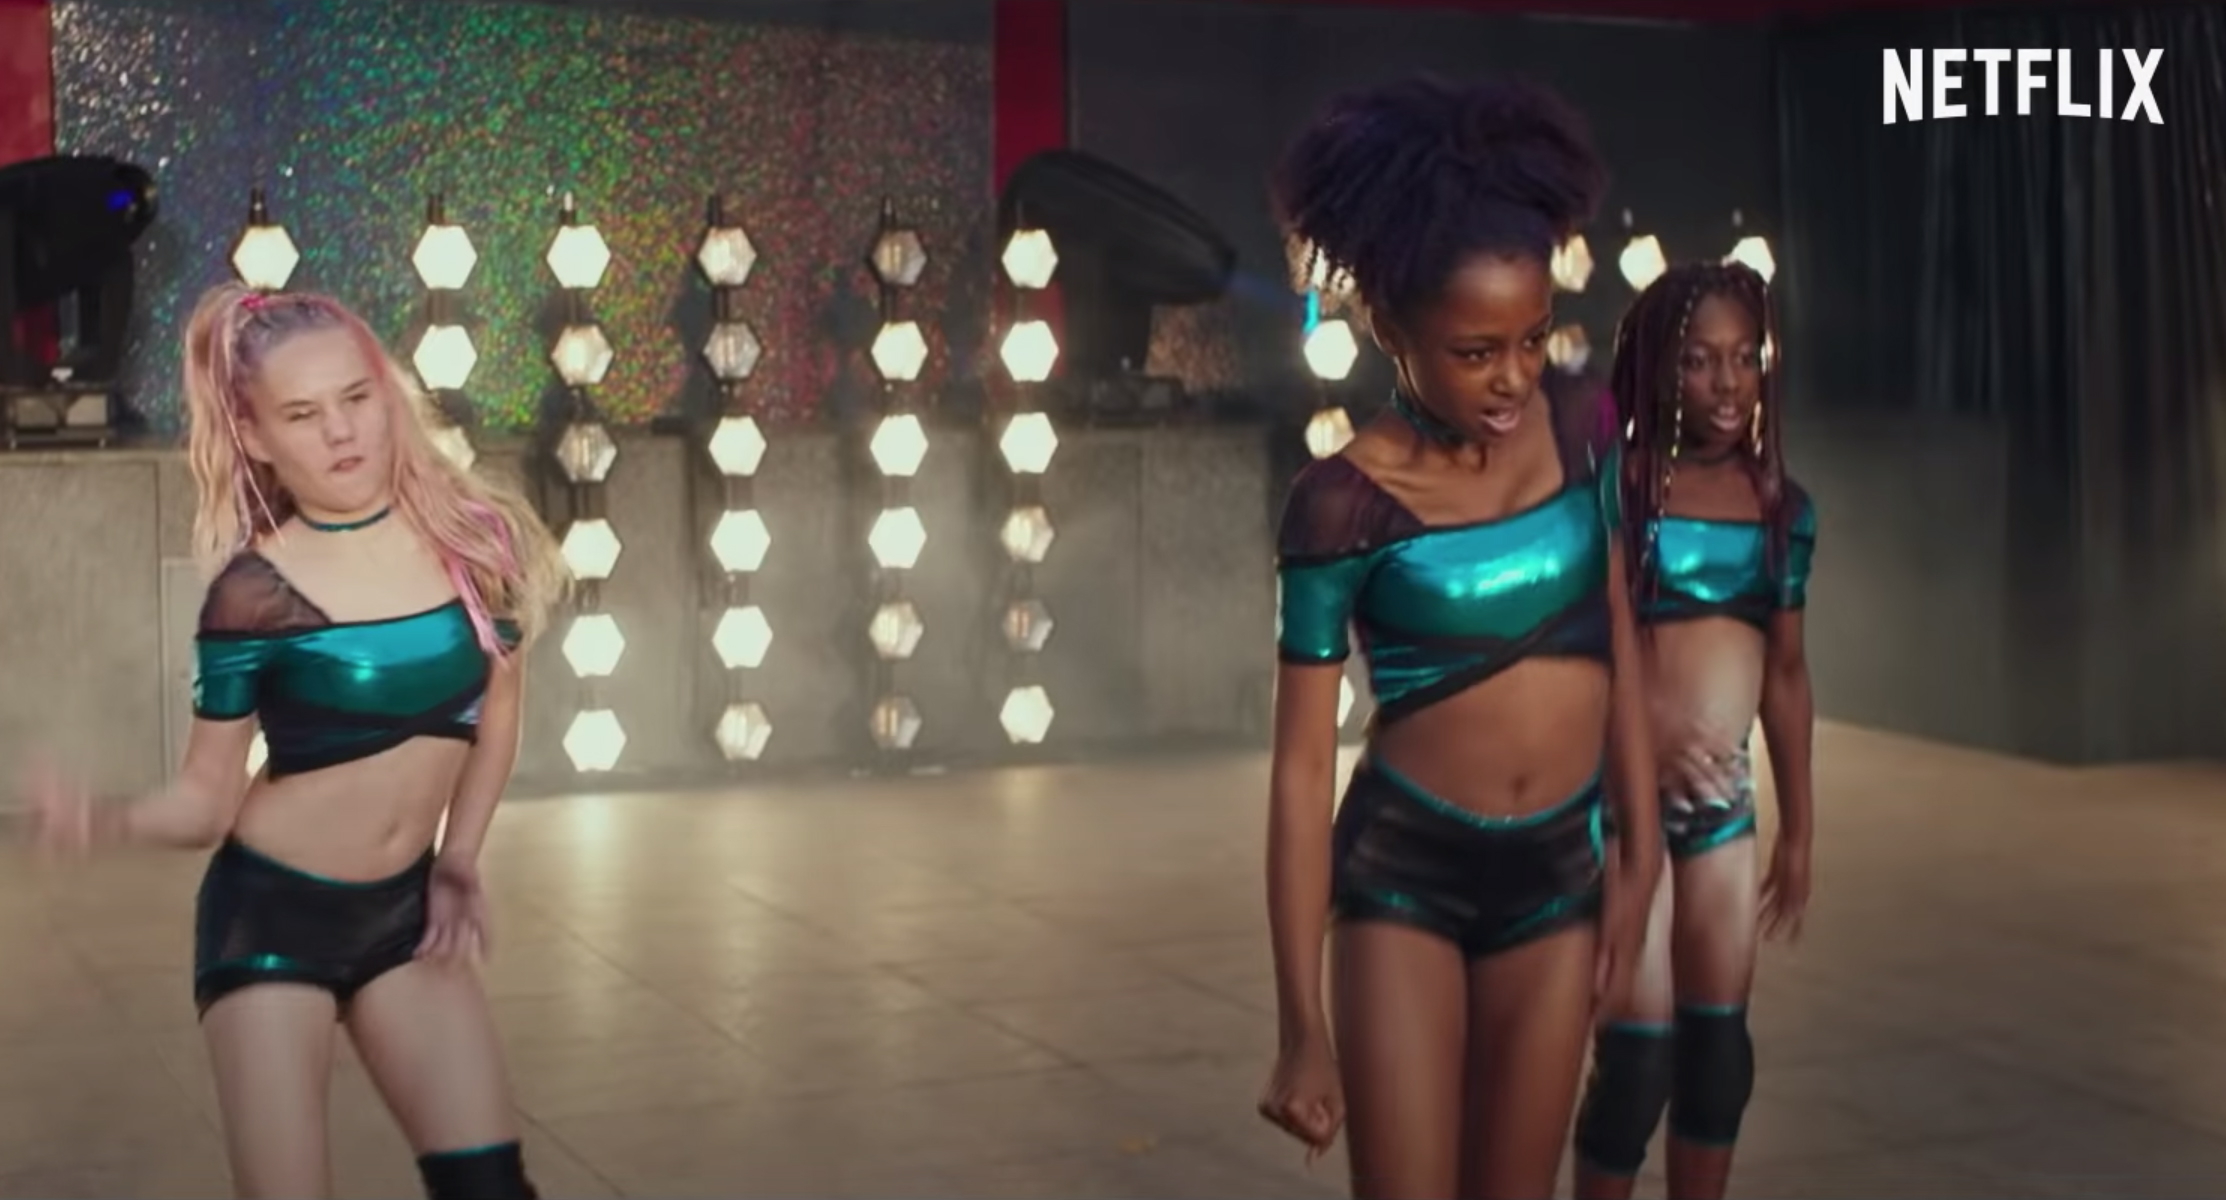 Netflix indicted over 'Cuties' film; Kelly Rowland pregnant; more...